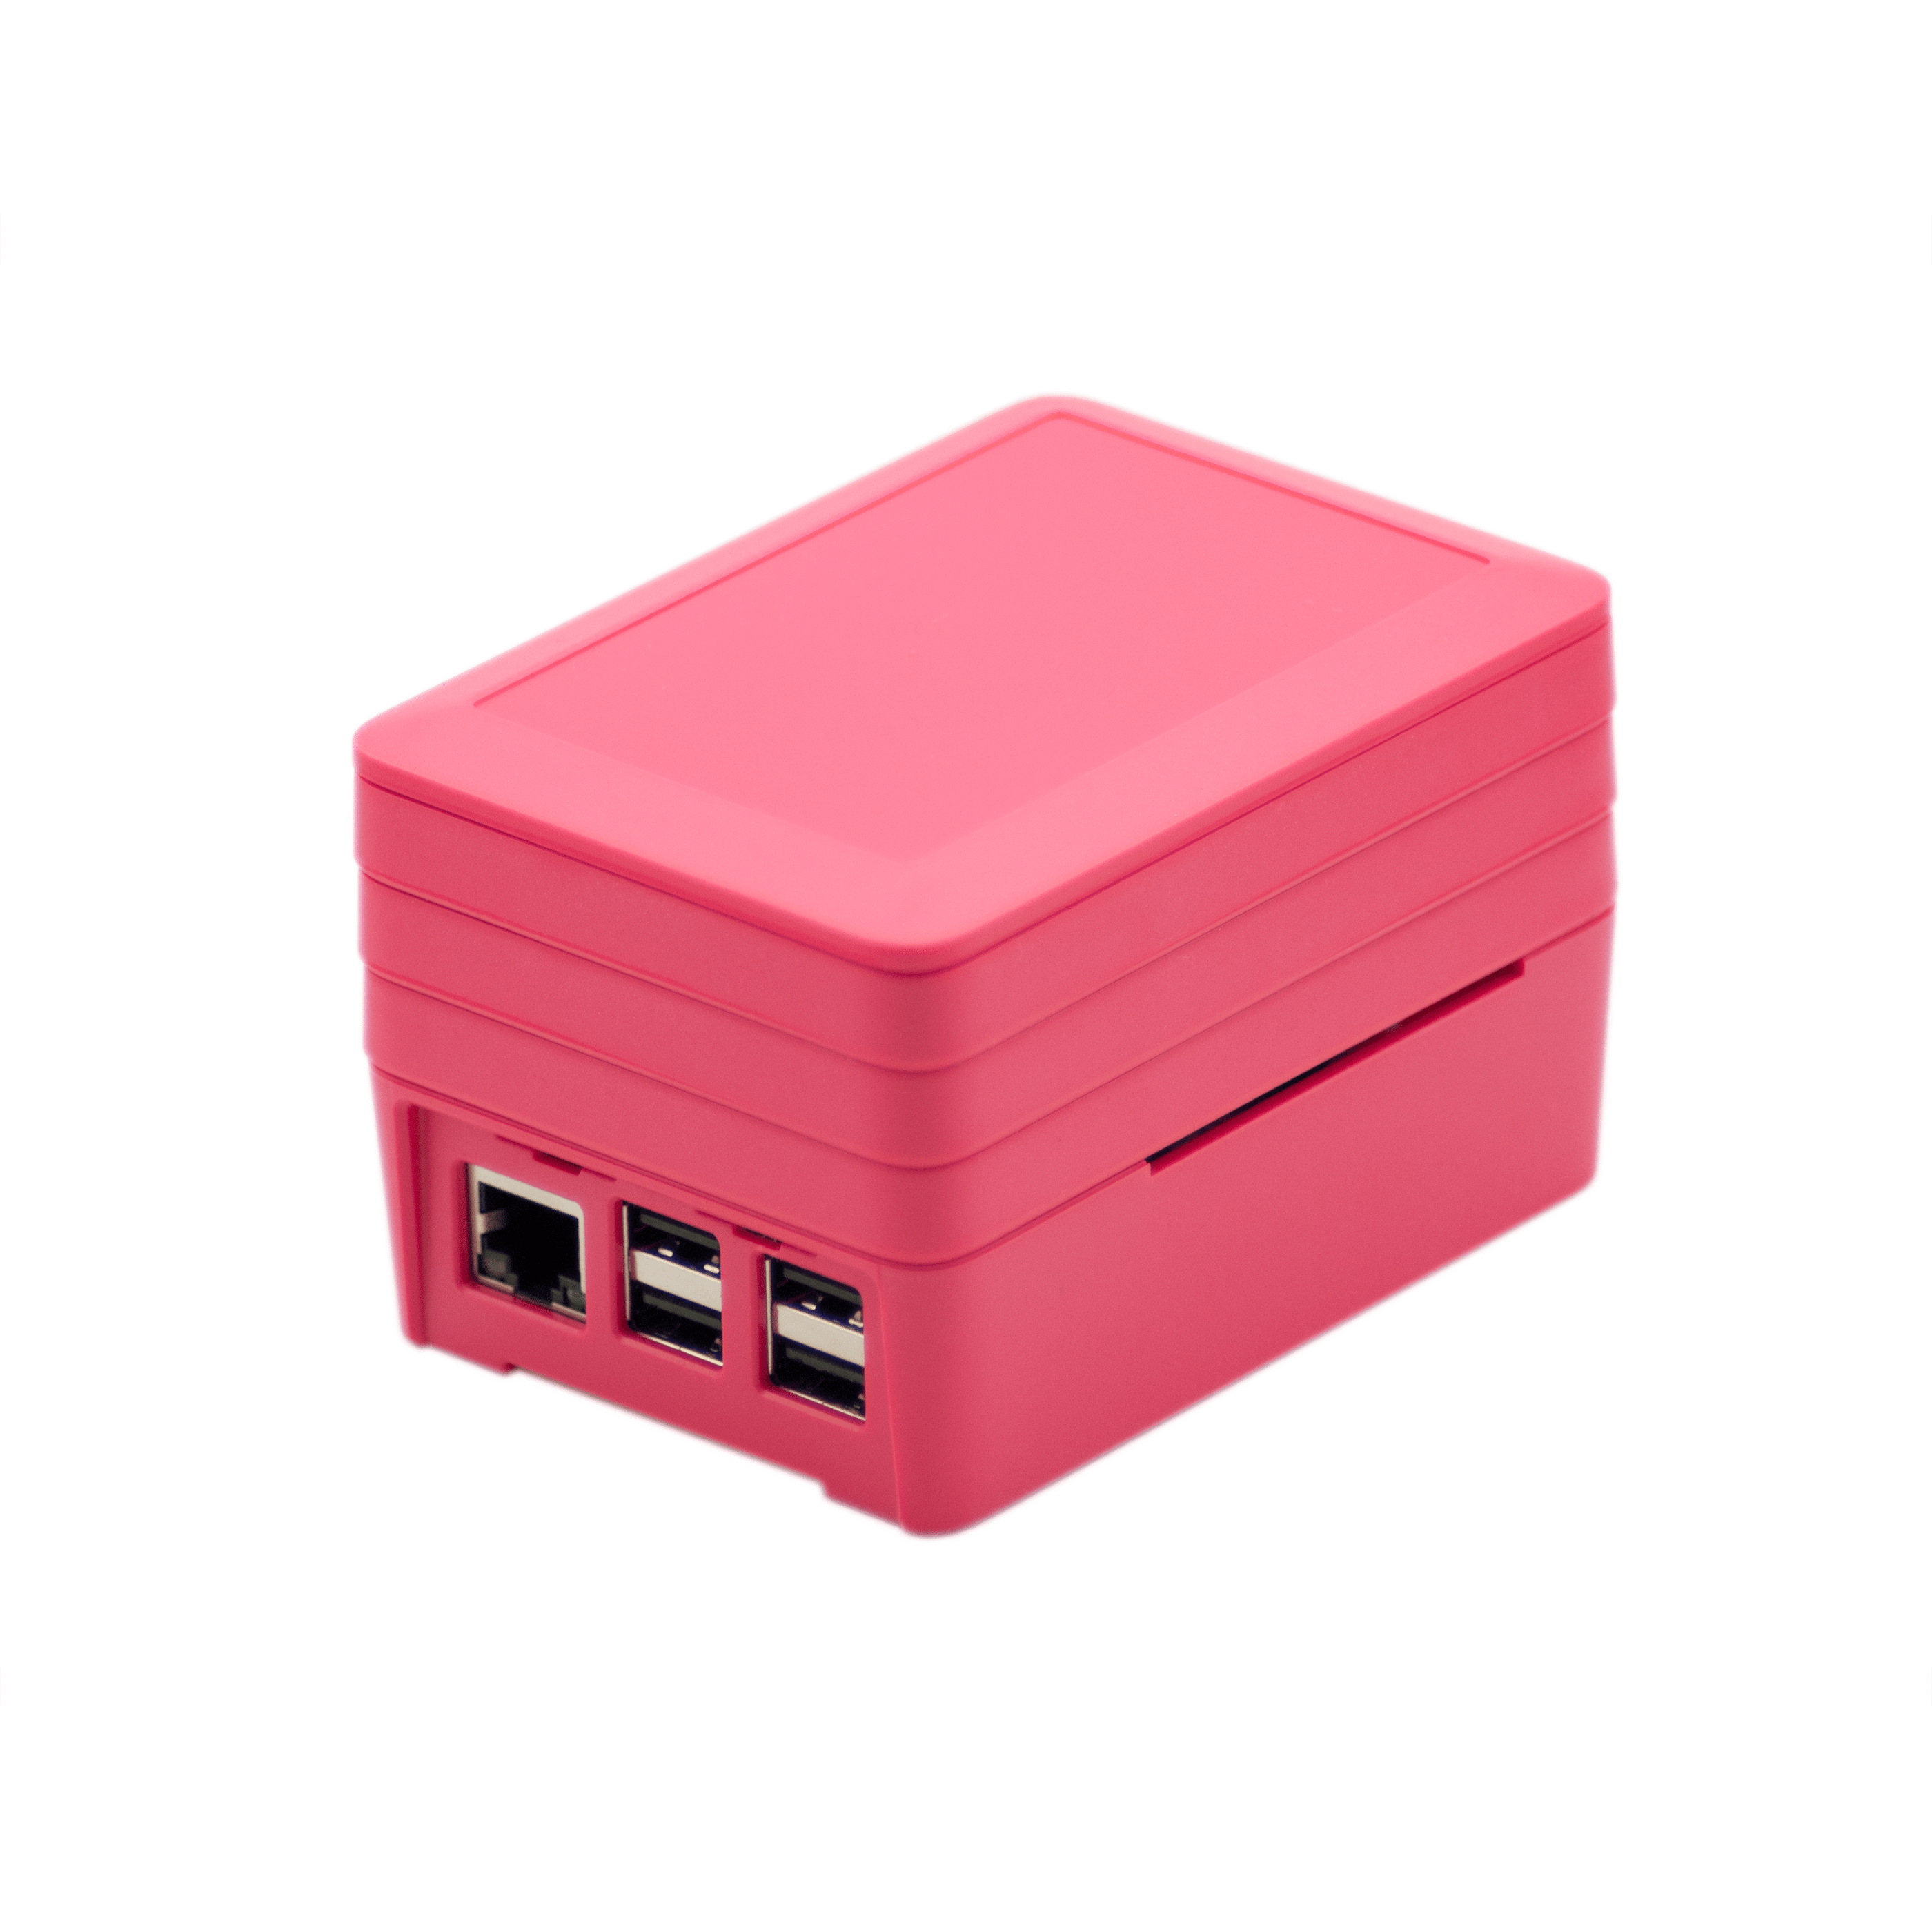 10mm Spacer for Modular Raspberry Pi Case - Pink - The Pi Hut